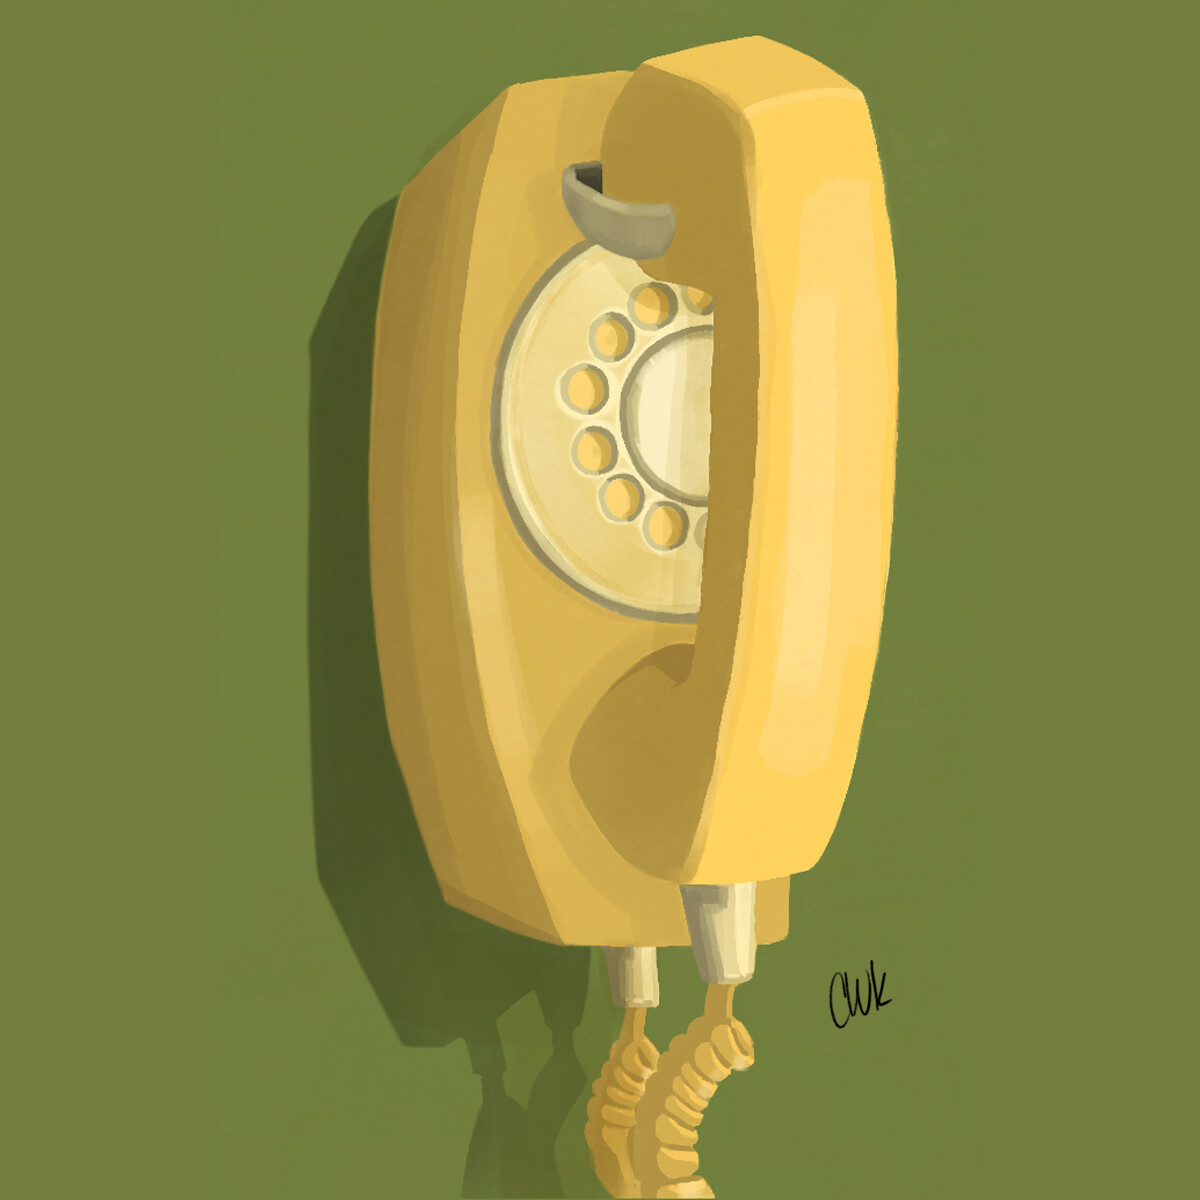 Wall telephone cira 1970's in harvest gold on an avocado background.